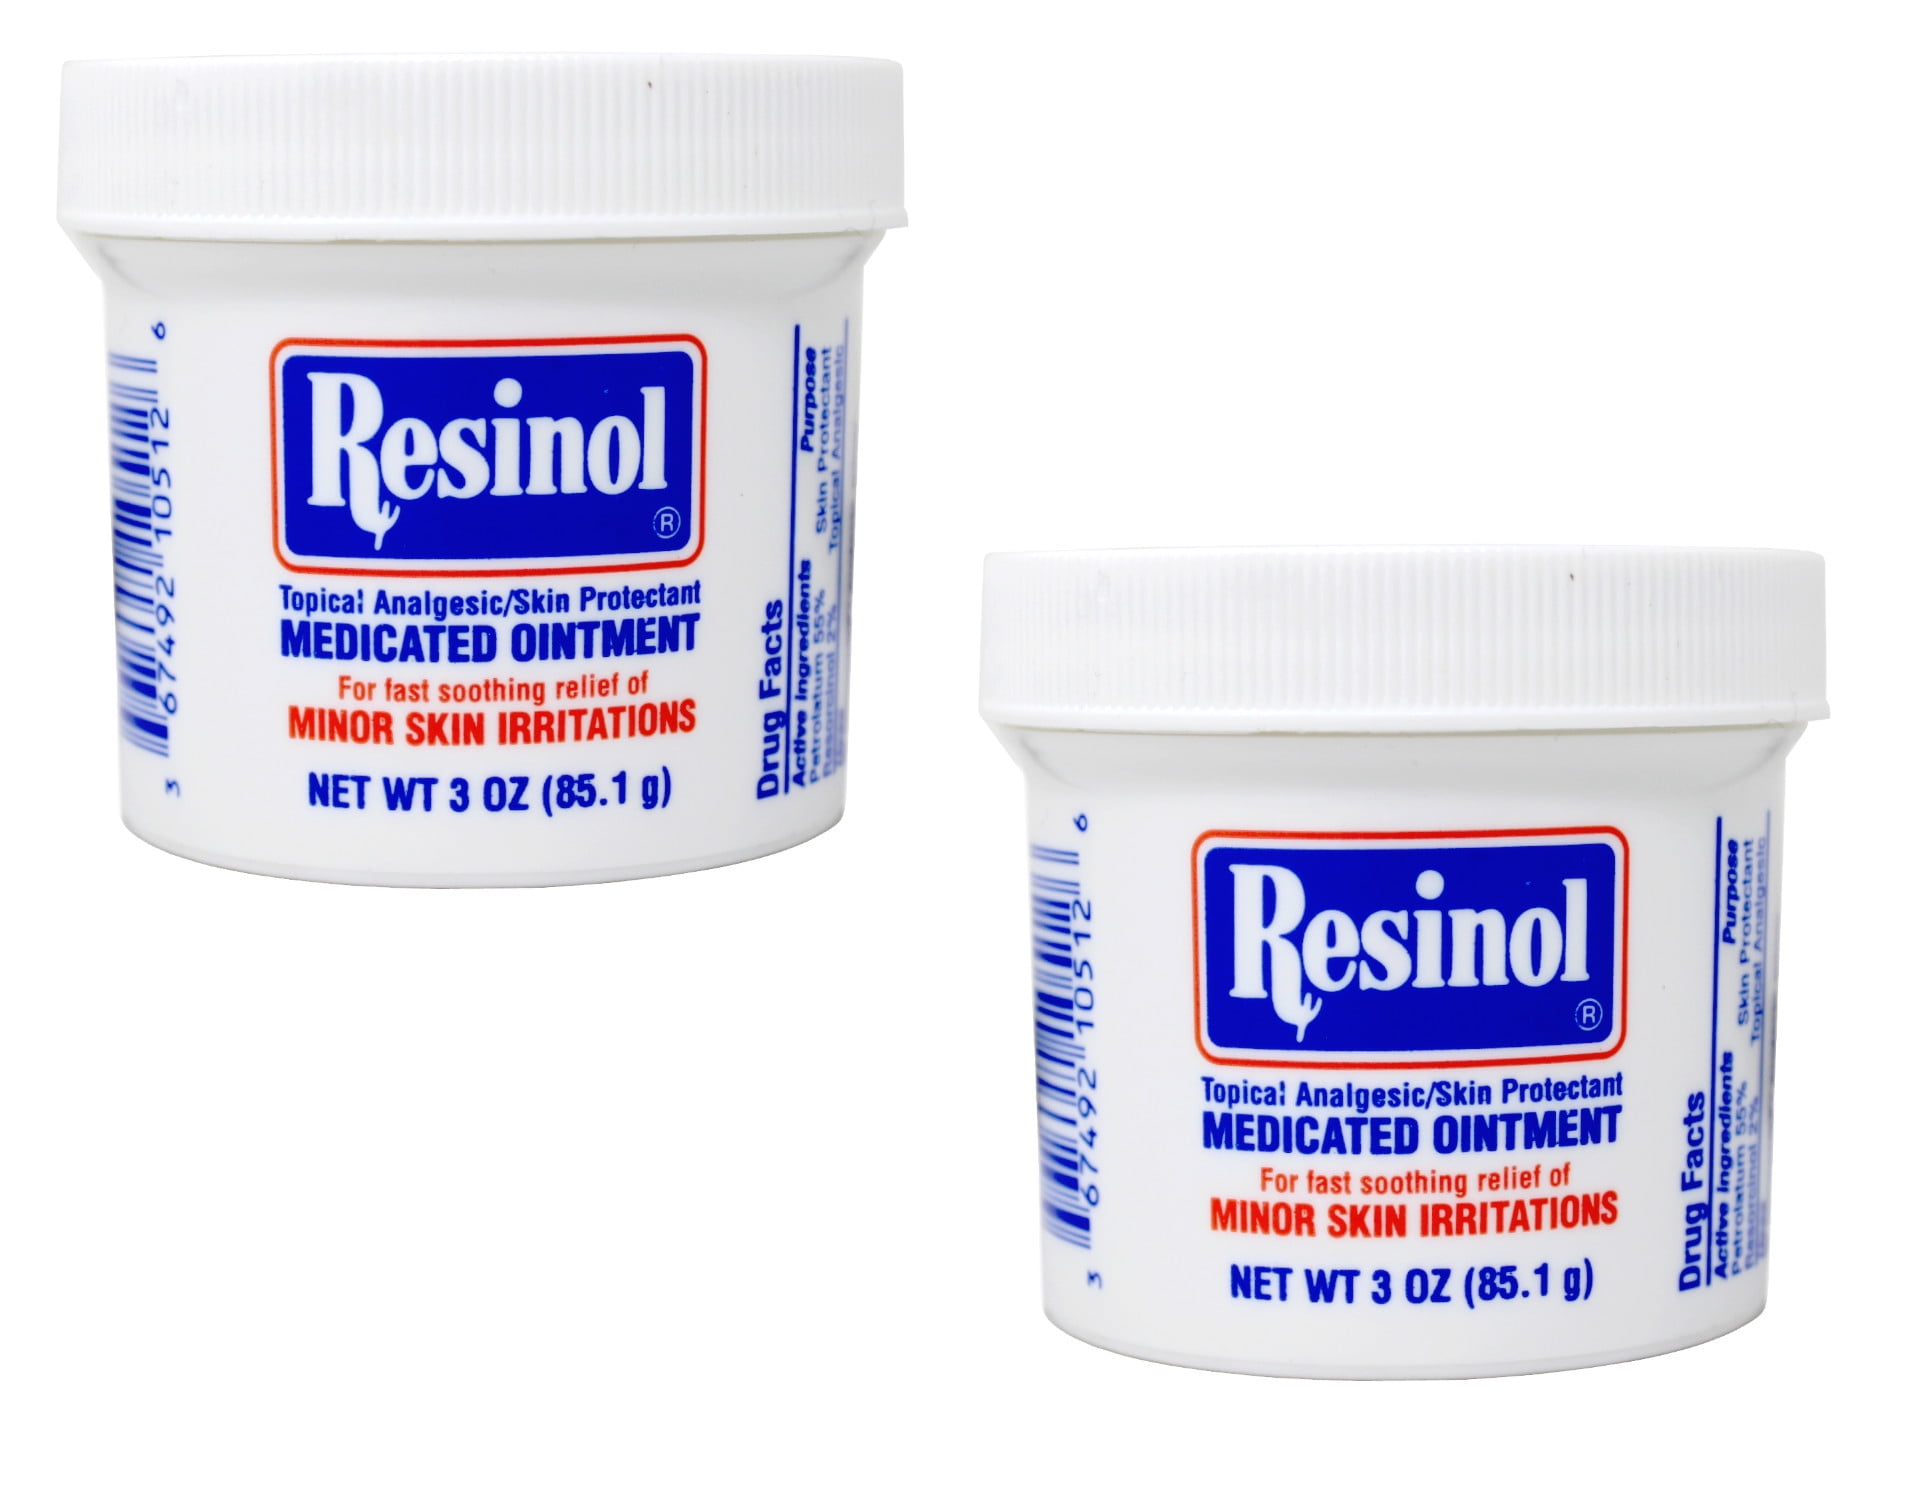 Resinol Medicated Ointment 3.30 oz (Pack of 2)